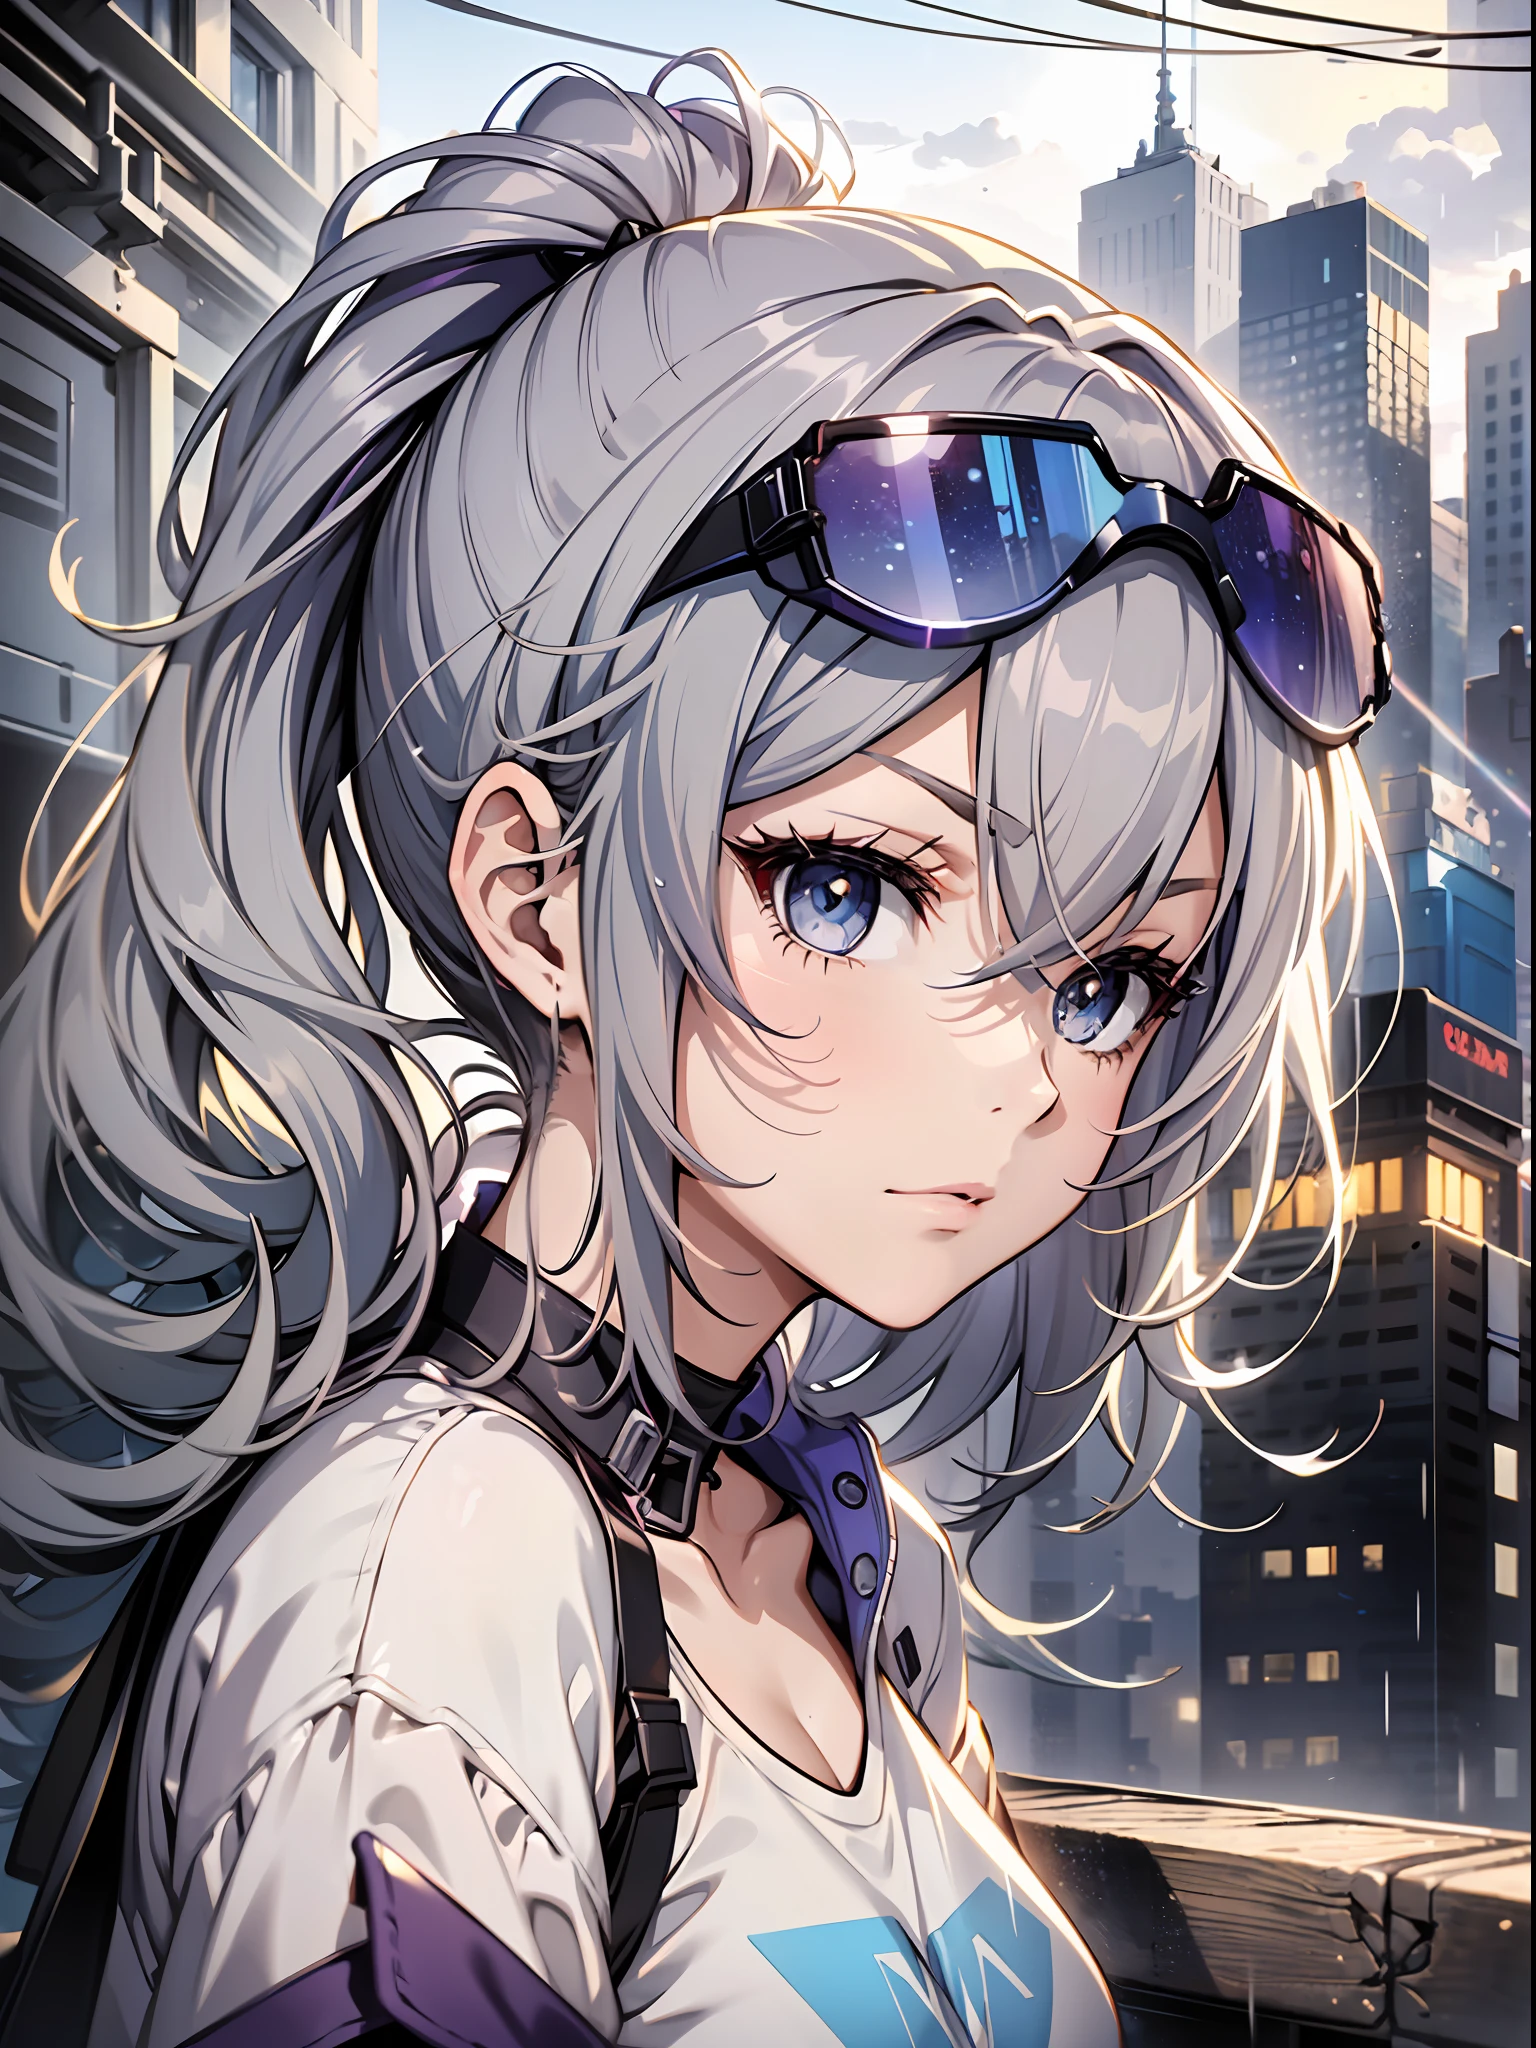 Exquisite masterpiece, the best quality, illustration style, an anime girl with a curly ponytail, beautiful eyes, white short sleeves with jeans, blue-purple gradient goggles, small, heartwarming, youthful and beautiful, heroic and sassy, gray hair, presenting a natural casual style. The dynamic posture contains the golden section, large aperture portrait, white screen, strong contrast between light and shadow, super texture, super clear and concise picture, presenting extremely beautiful, elegant temperament, exquisite facial expressions, city background, after rain, rainbow, and the beginning of the lights